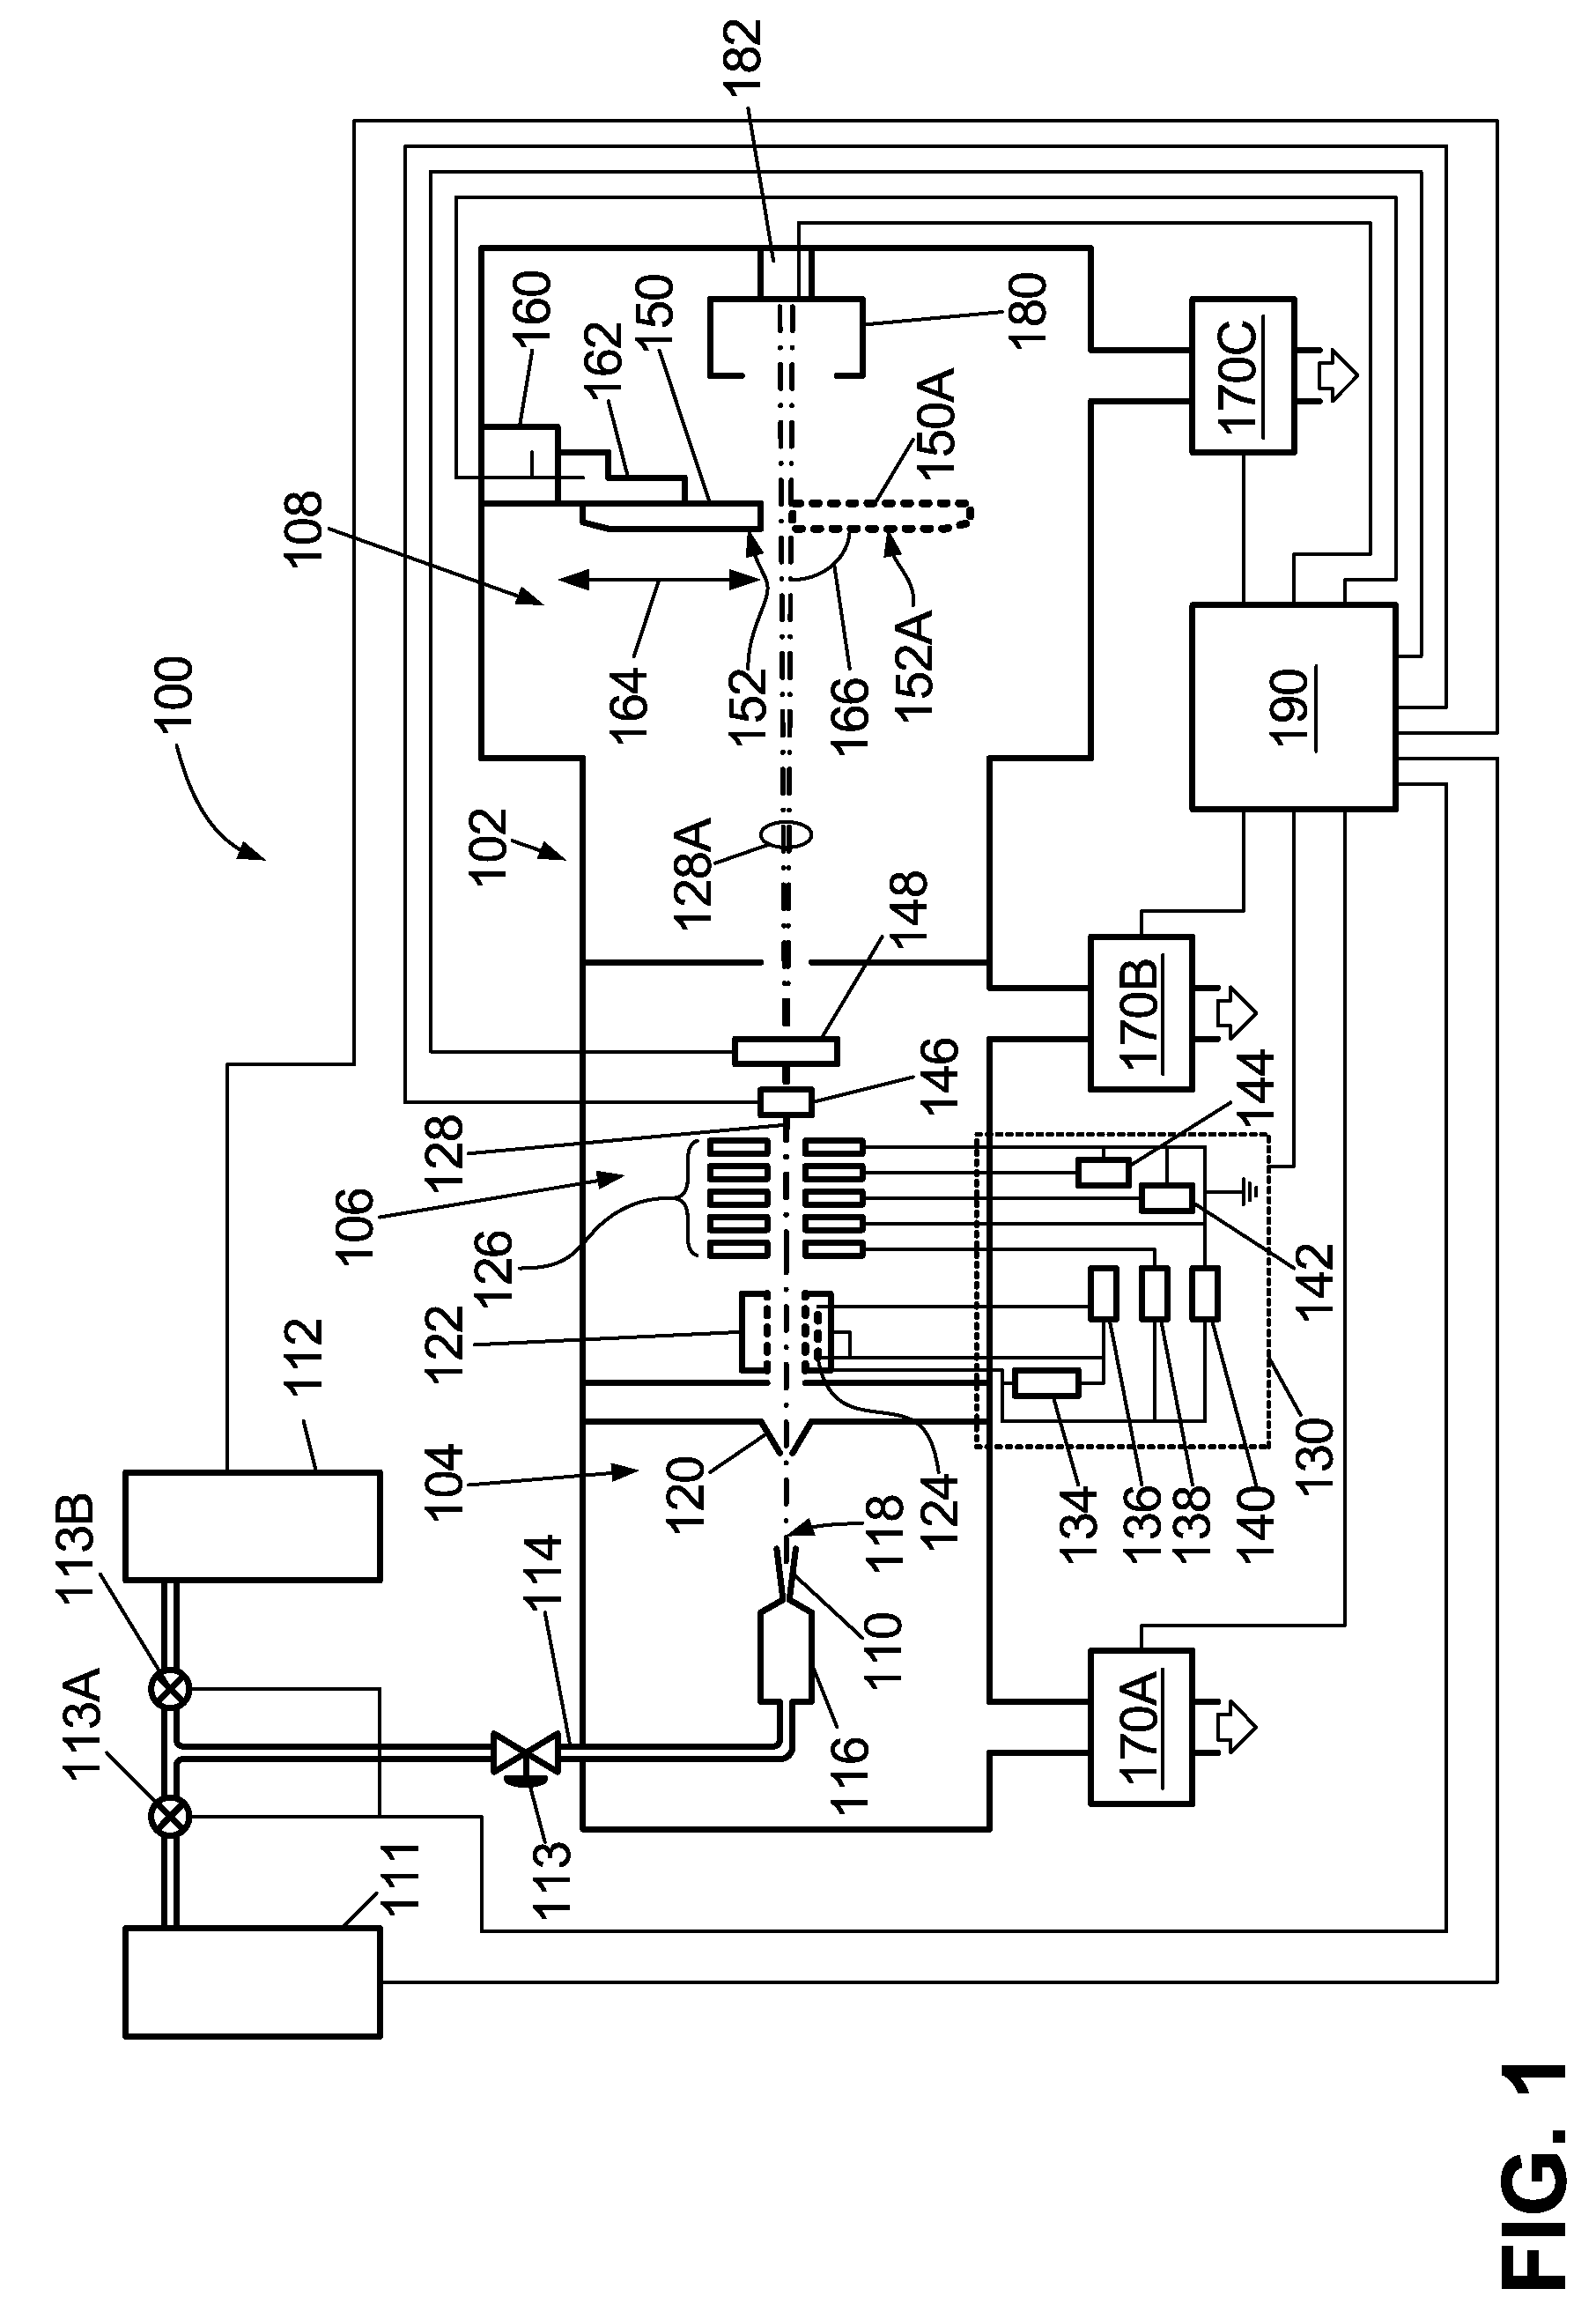 Method for depositing films using gas cluster ion beam processing